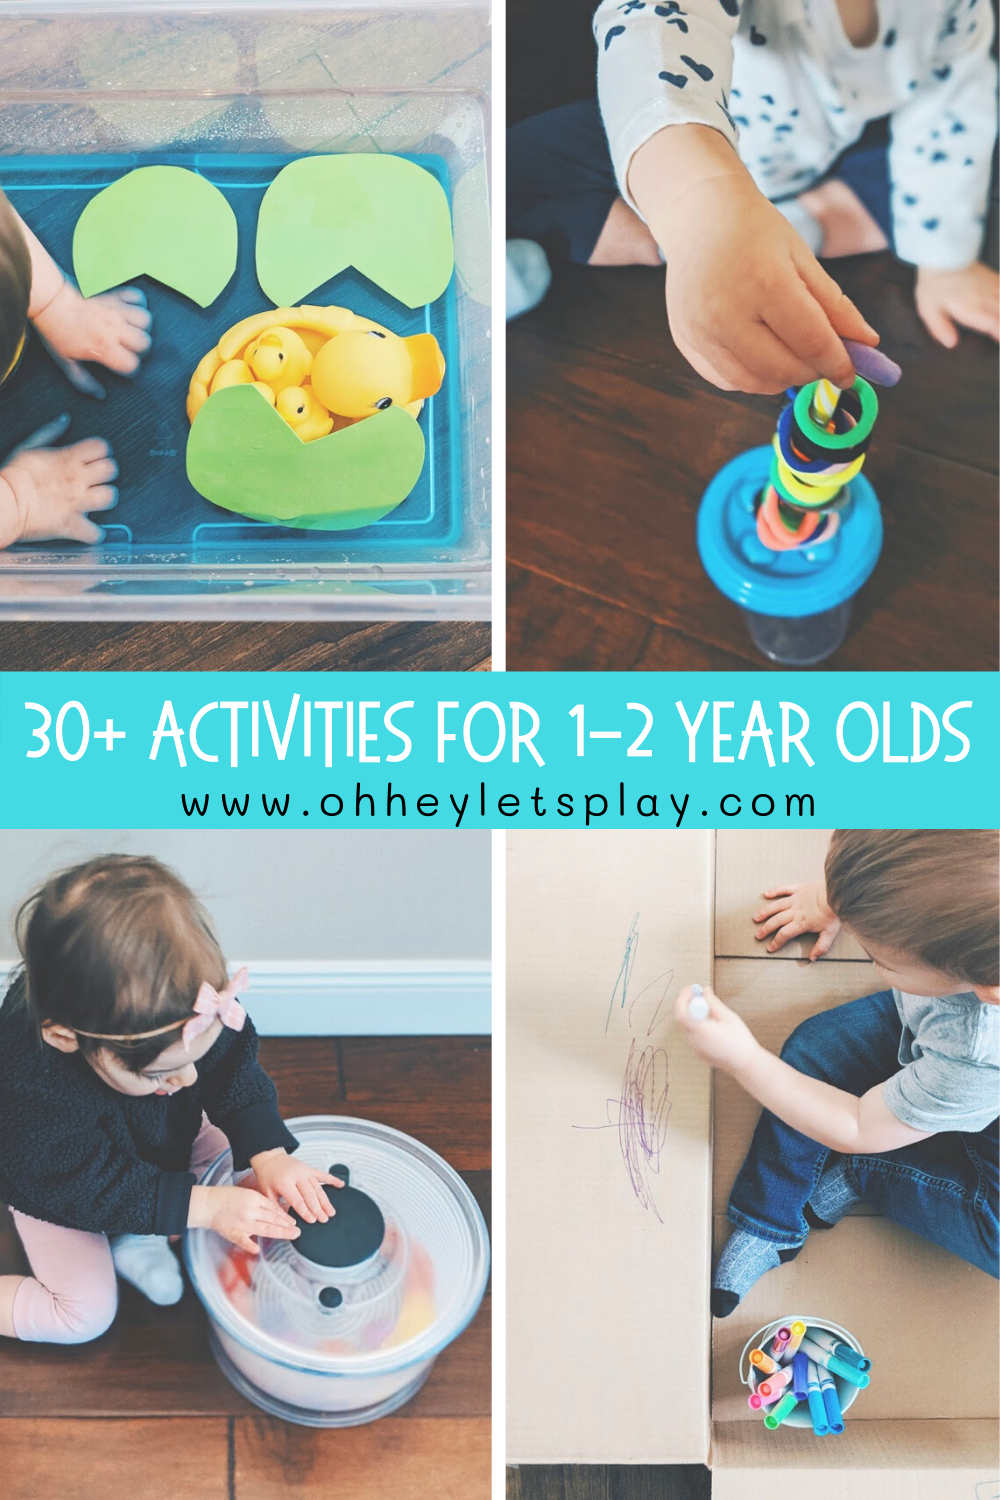 The Best Toddler Crafts - Happy Toddler Playtime